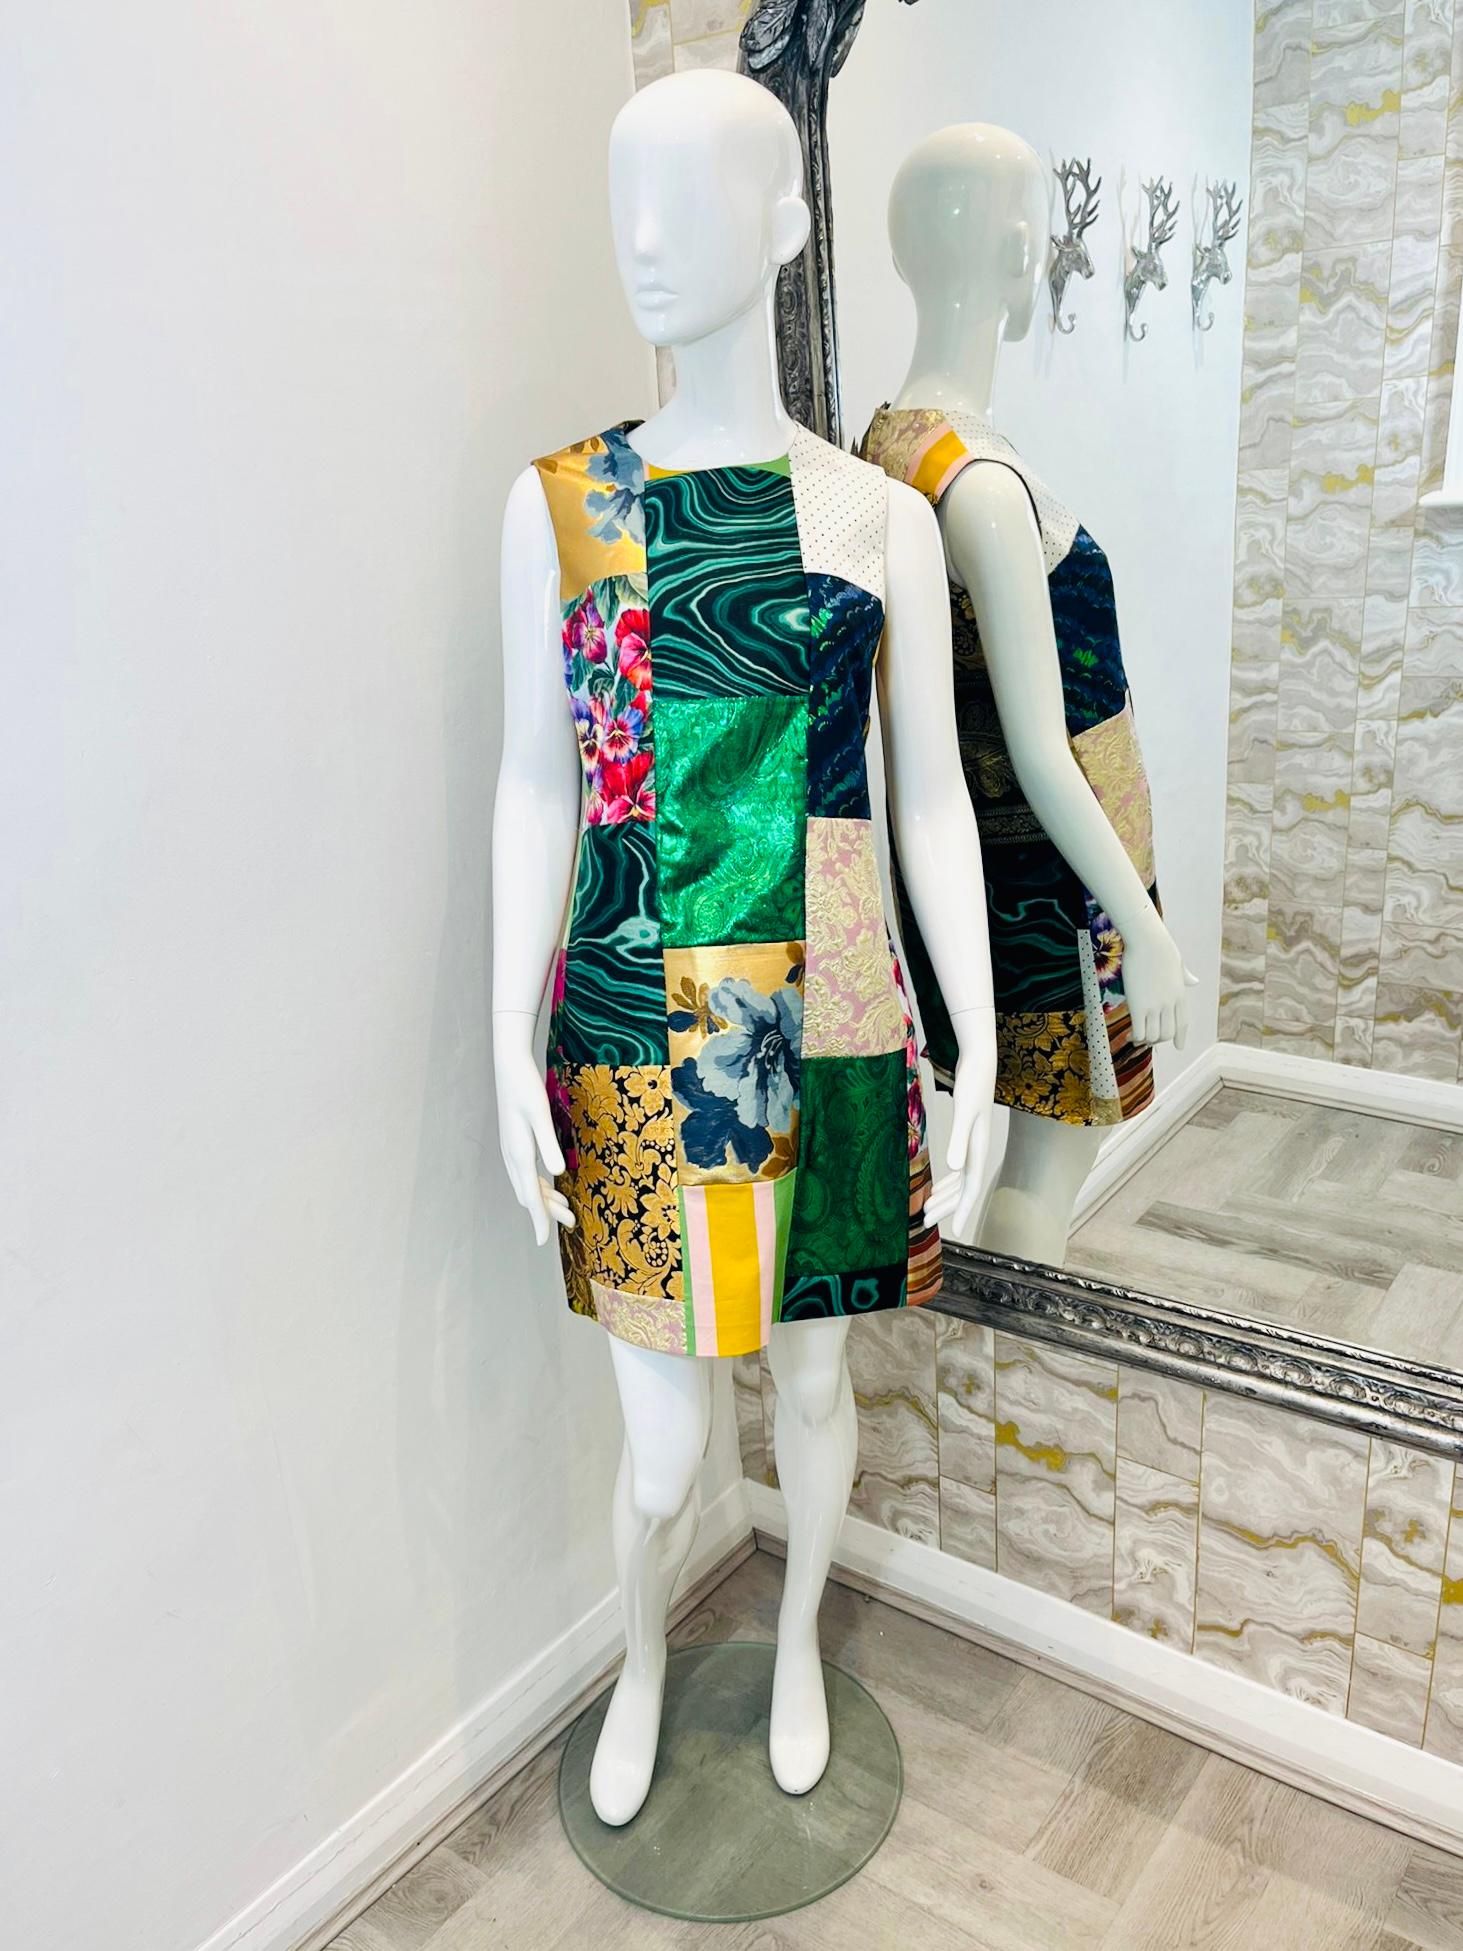 Dolce & Gabbana Brocade & Lame Patchwork Dress

Multi-coloured, sleeveless mini dress with patchworks of different materials

and textures, such as brocade and lame. Rrp £1,400.

Size - 44IT

Condition - Excellent

Composition - 43% Polyester, 33%